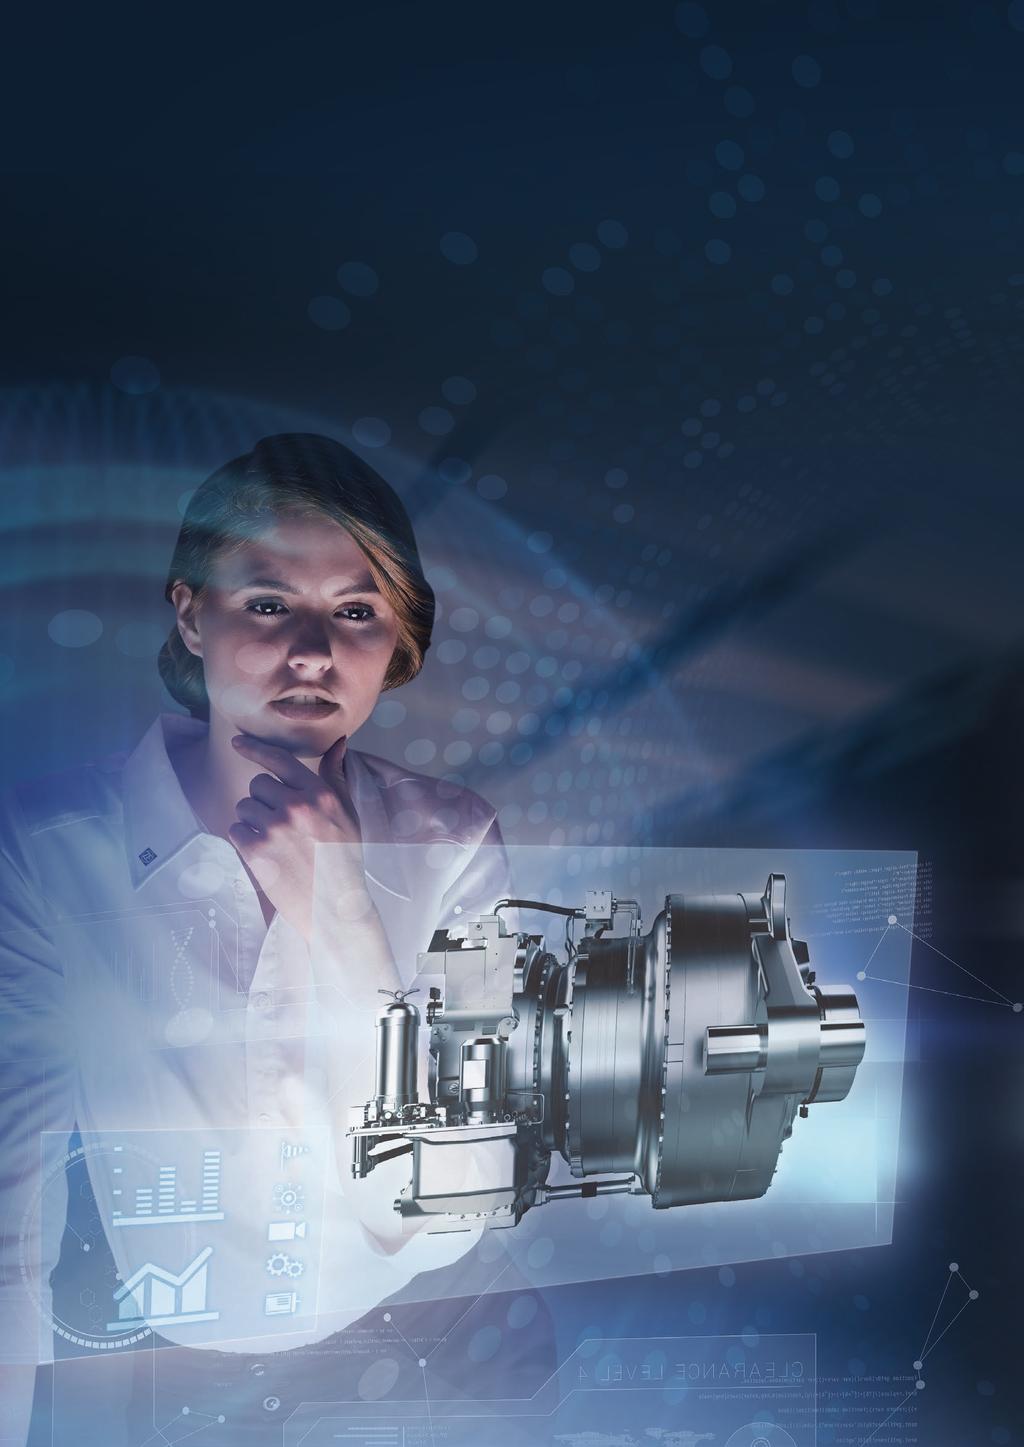 10 11 Digitalization As a continuous innovator, ZF is preparing for the next generation of wind turbine gearboxes and intelligent connection solutions that will further improve the Levelized Cost of